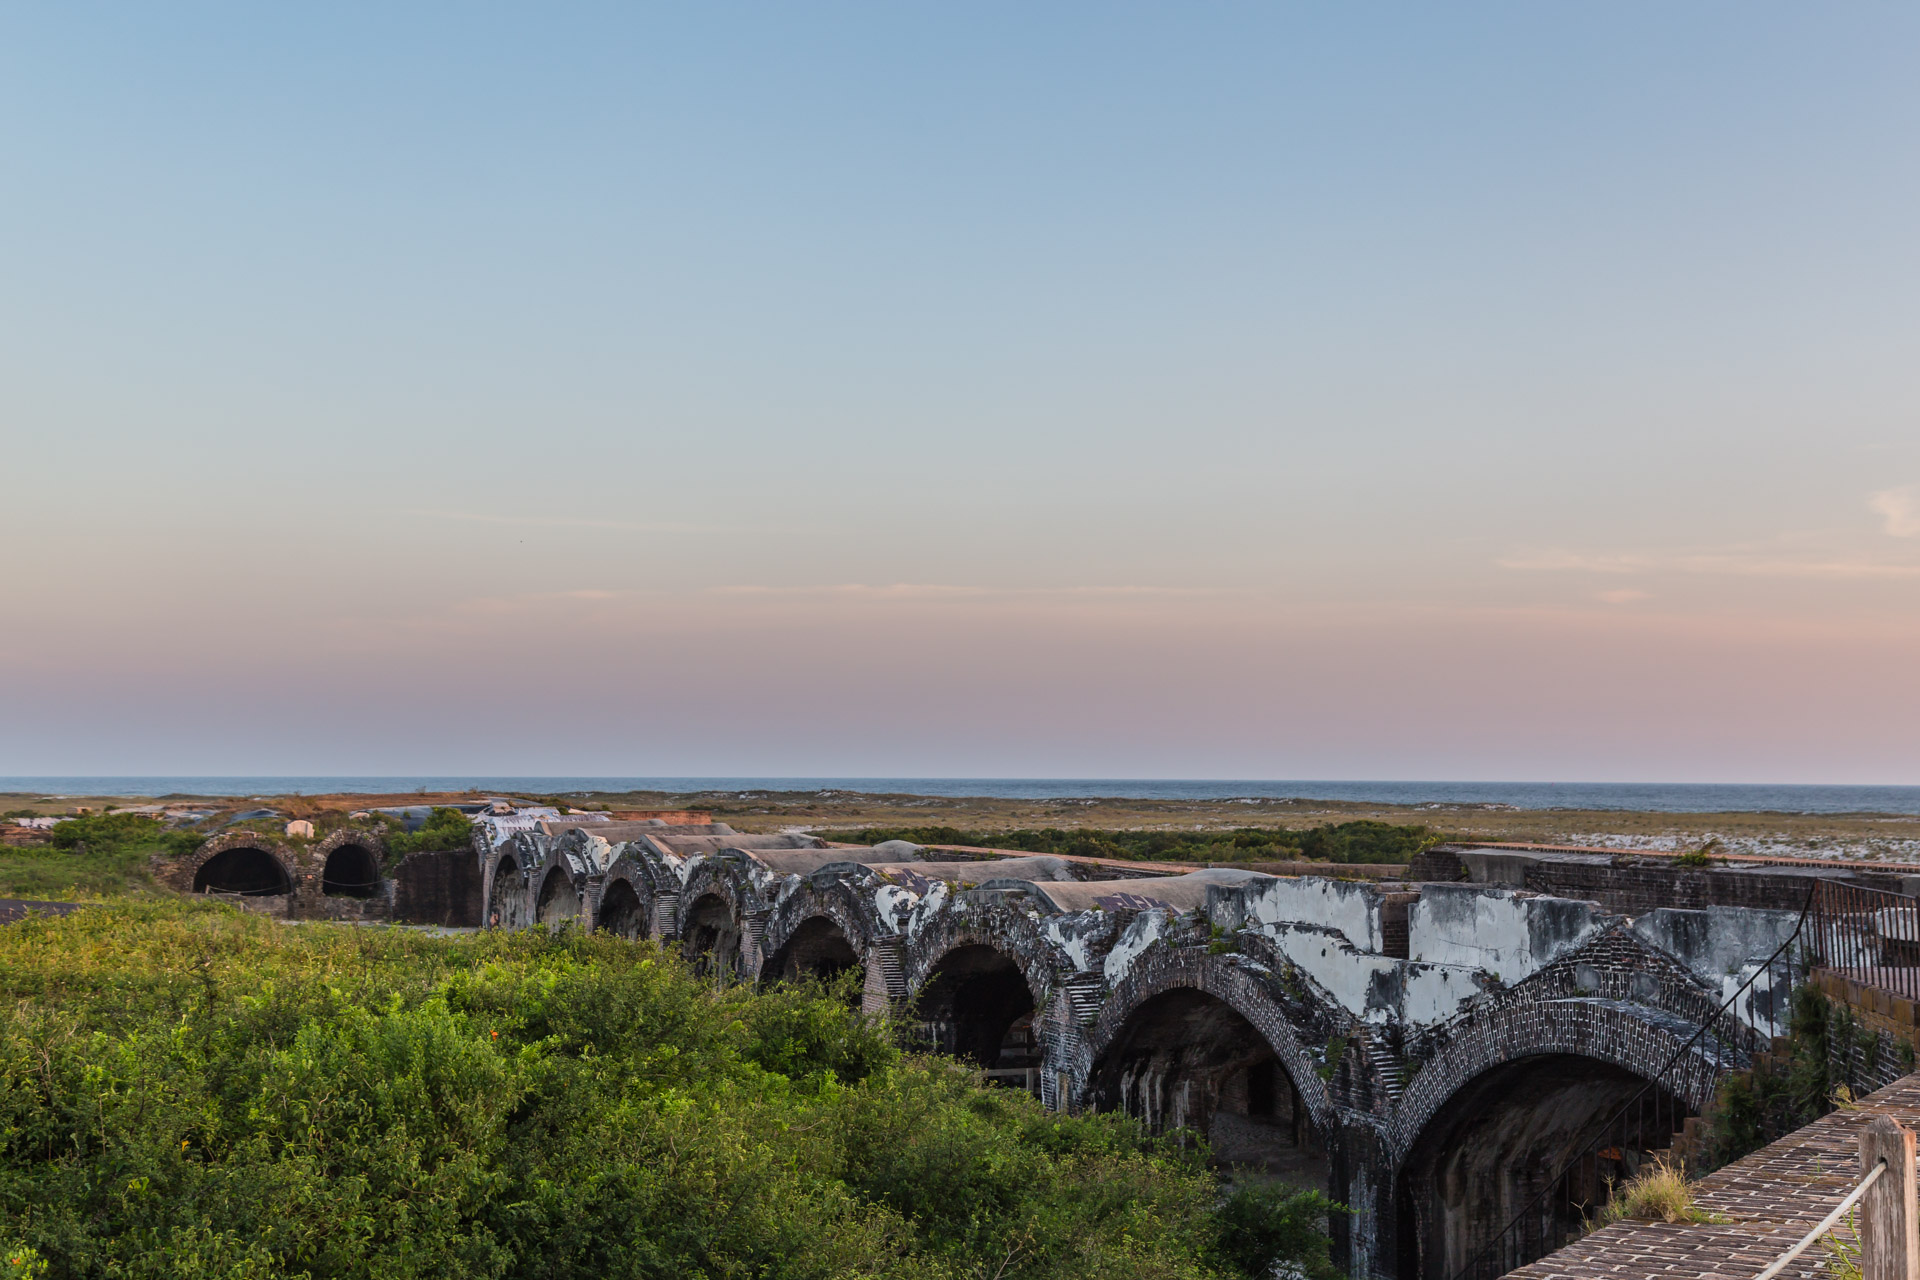 Fort Pickens (top)